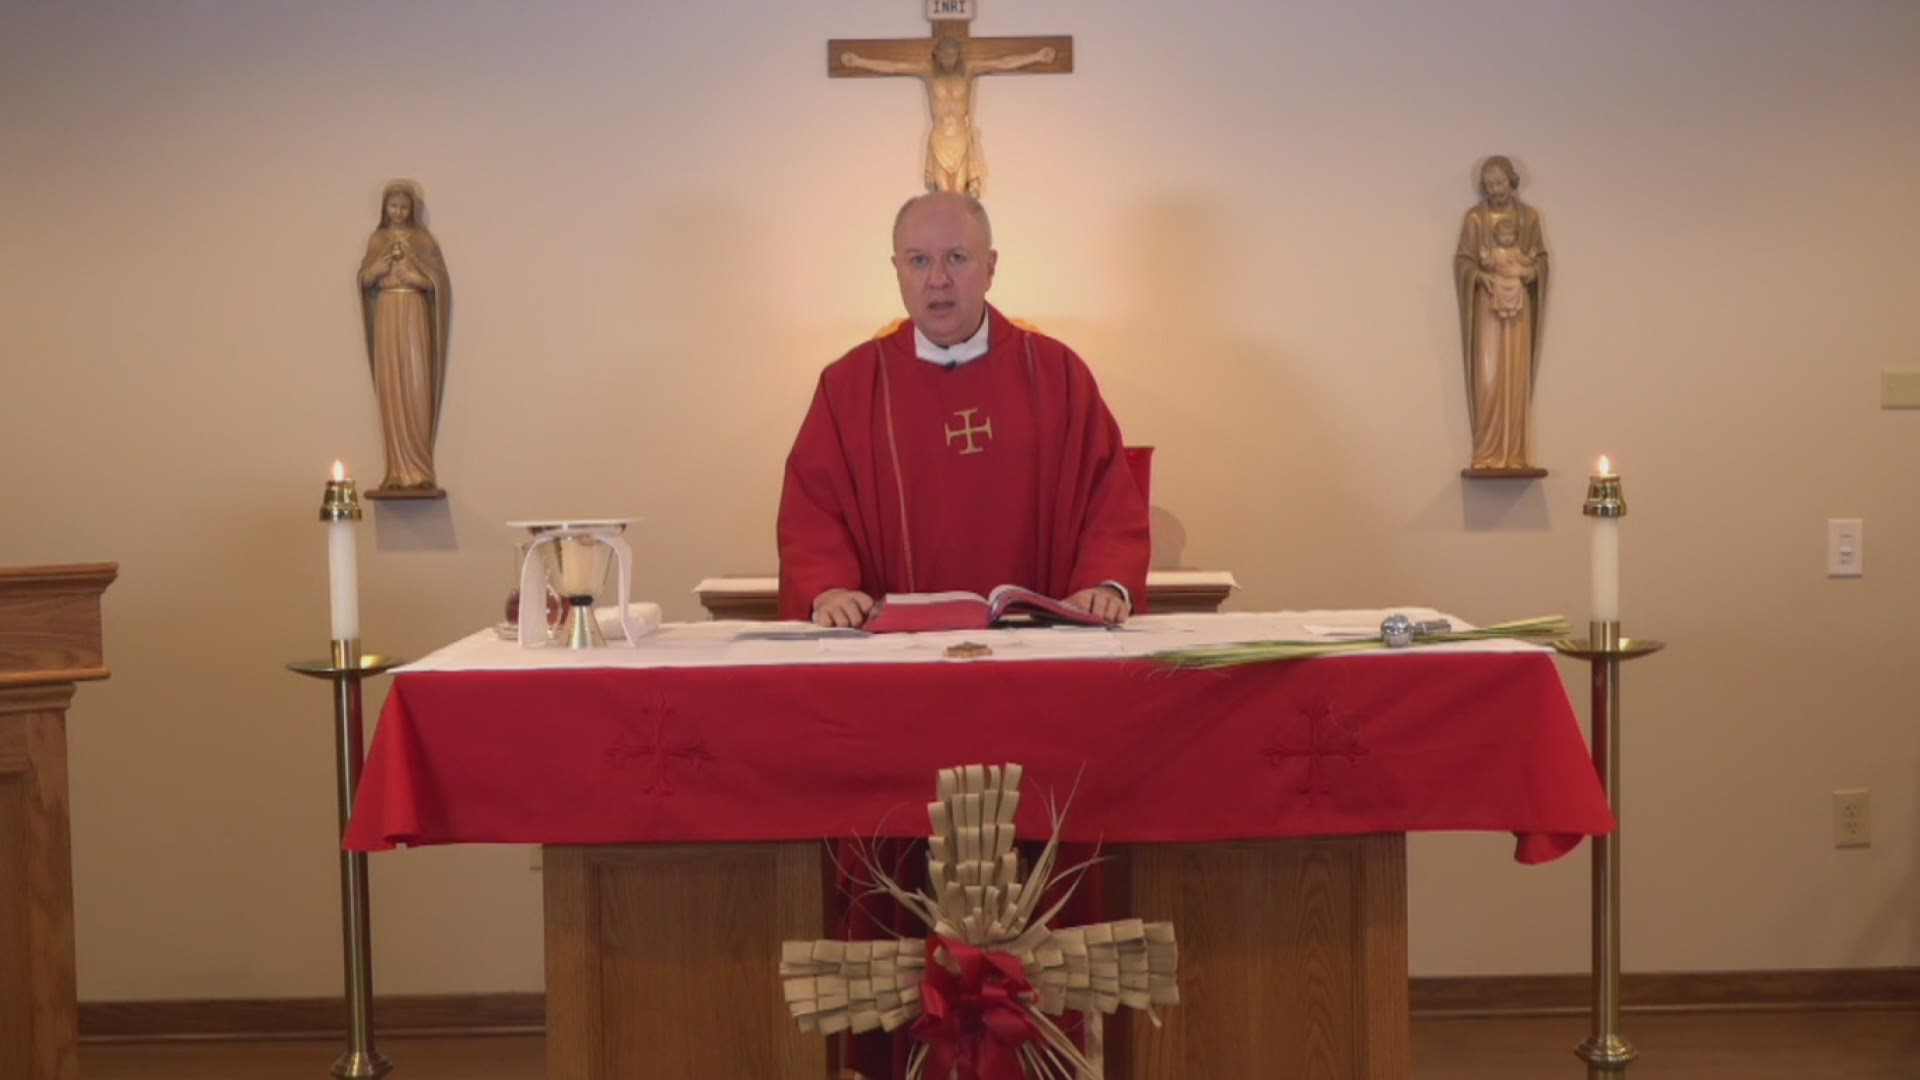 April 5, 2020: Here's a portion of the Palm Sunday mass, which was streamed online by the Catholic Diocese of Cleveland as Holy Week begins.